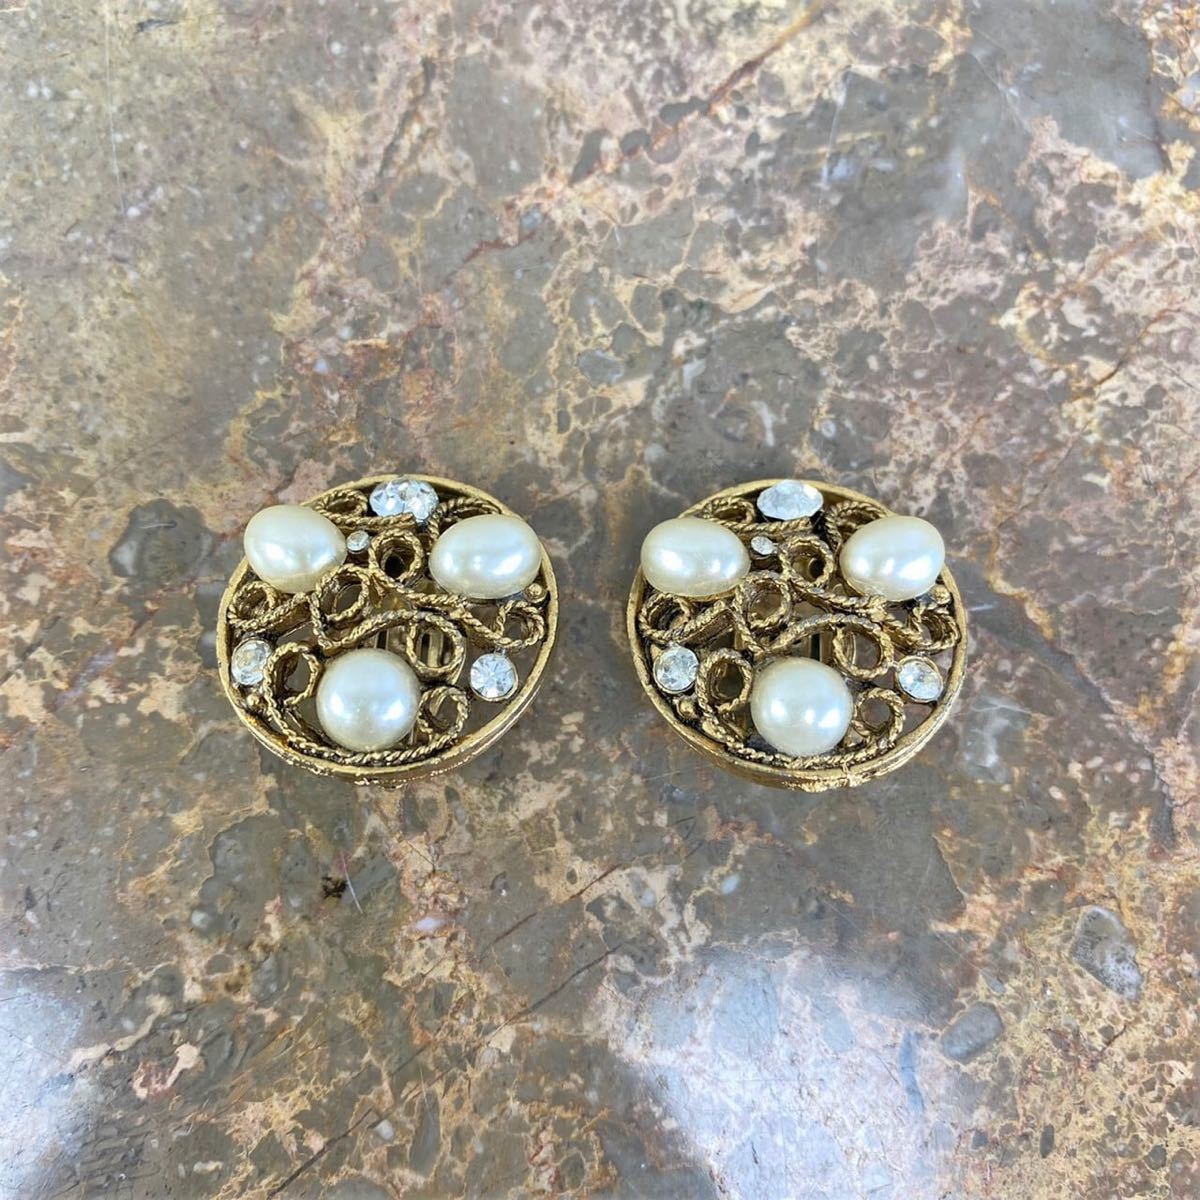 USA VINTAGE PEARL DESIGN EAR CLIPS/アメリカンヴィンテージパールデザインイヤリング